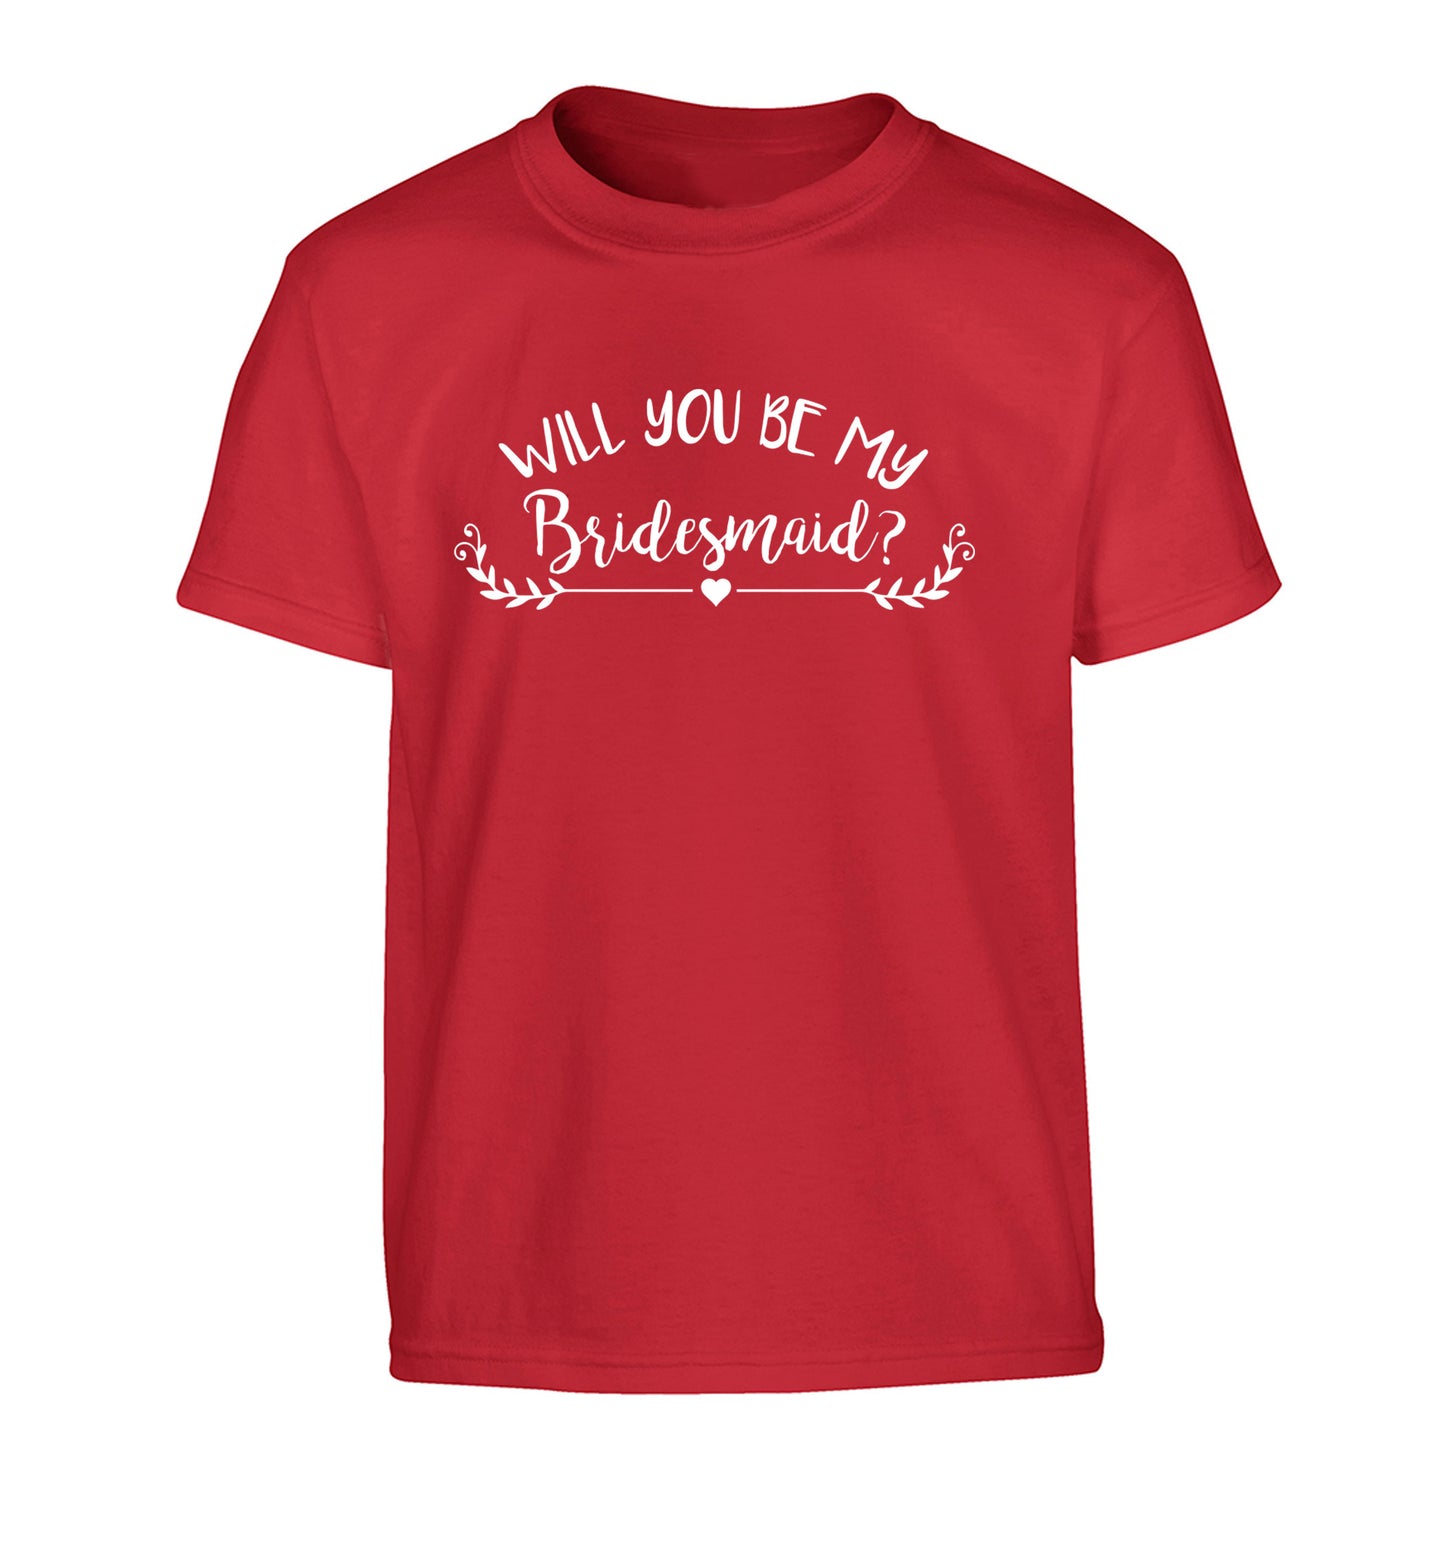 Will you be my bridesmaid? Children's red Tshirt 12-14 Years